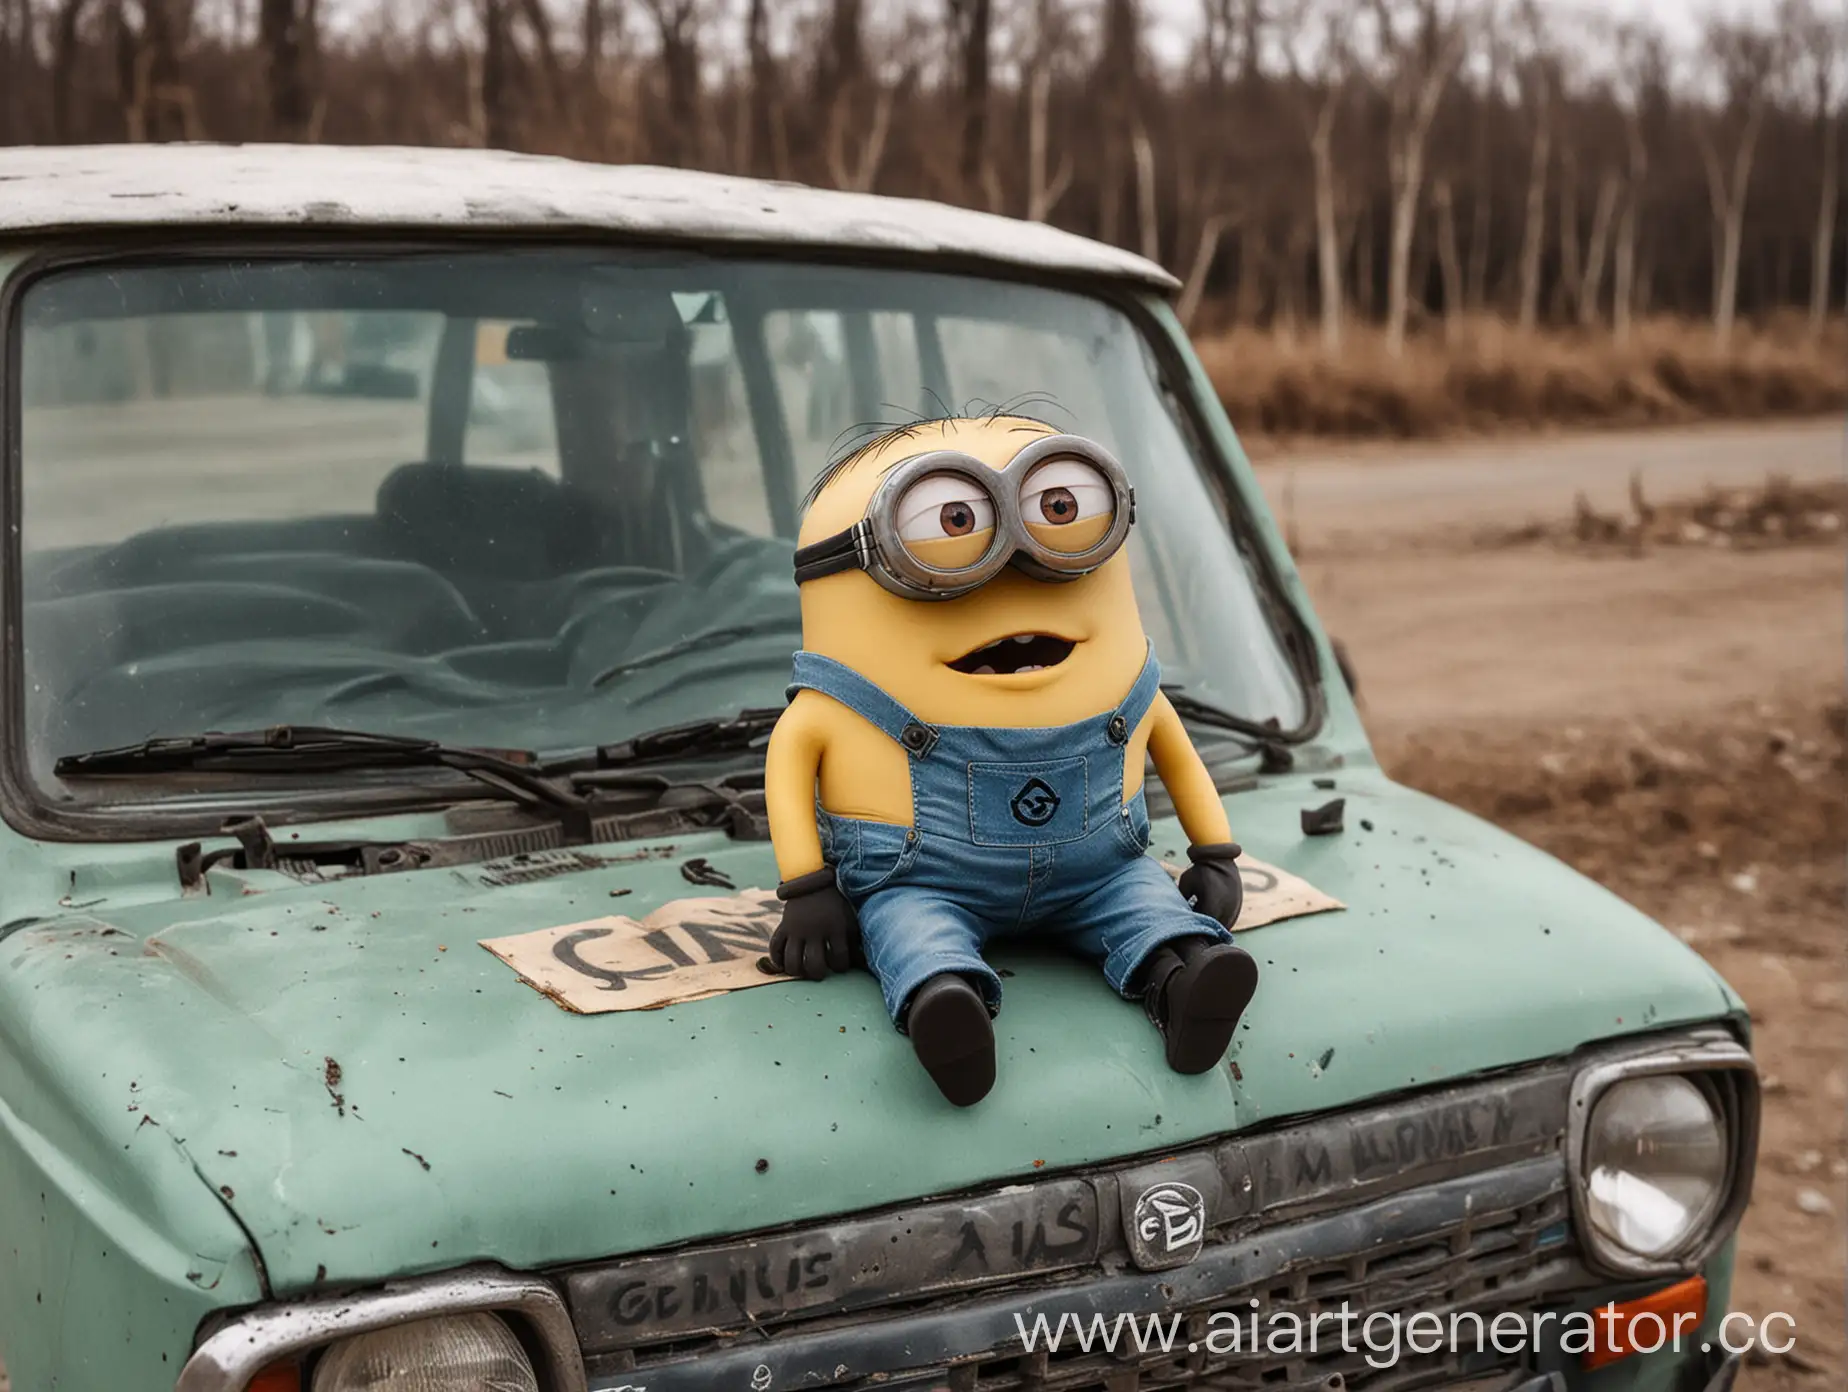 A sad minion is sitting on a Lada, "Genius" is written on his back